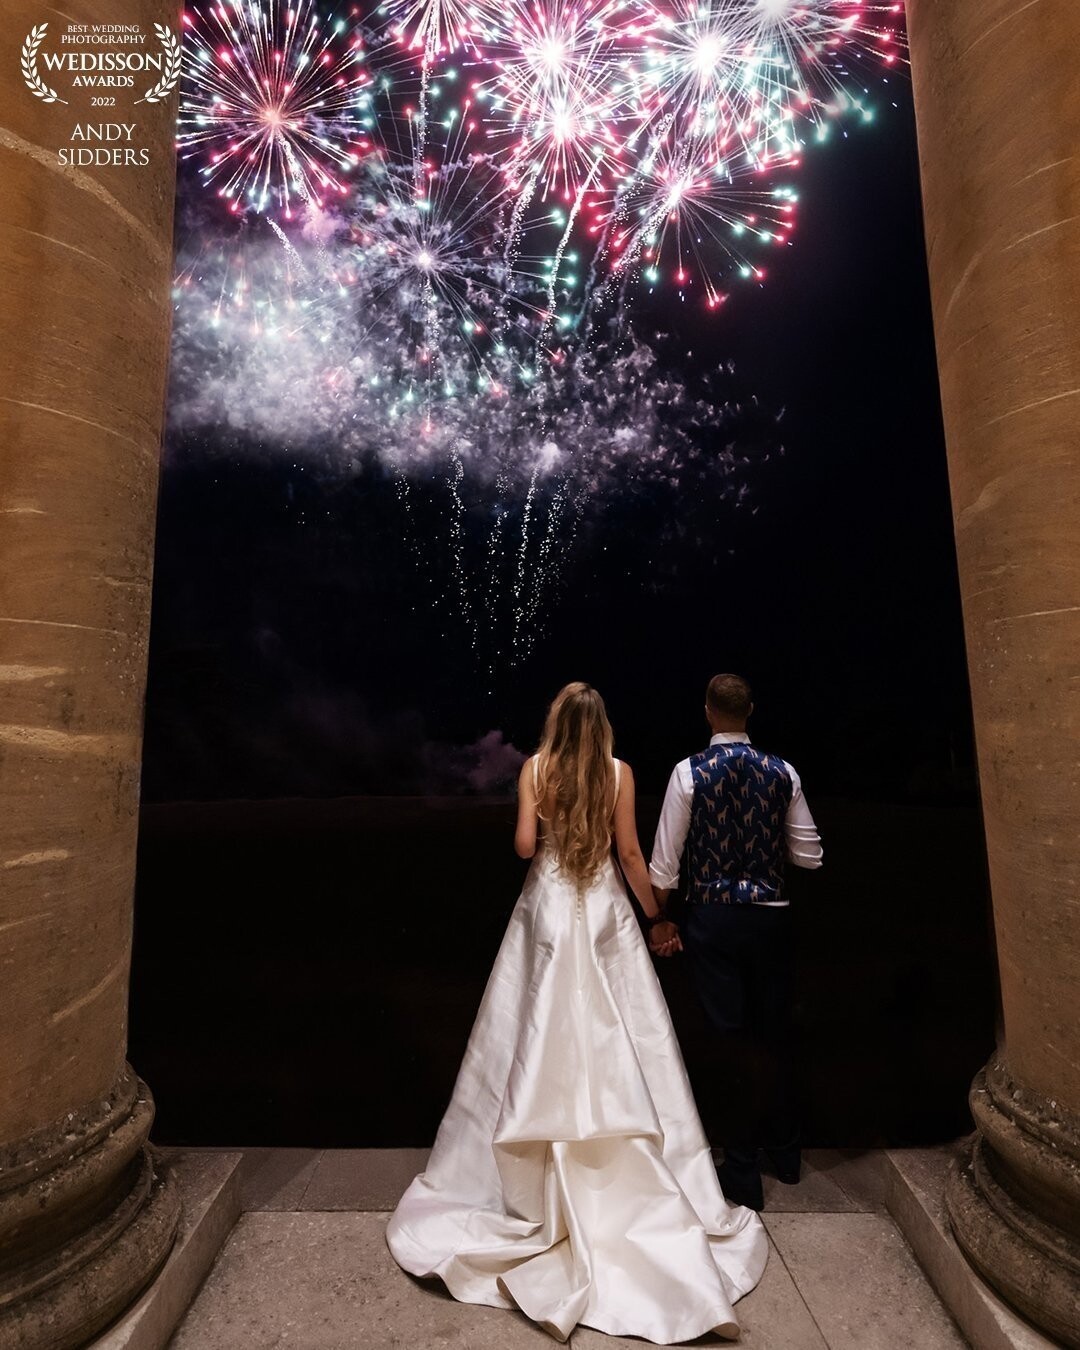 This shot is from Maia & Matt's wedding at Stowe House in Buckinghamshire, UK. Their guests were gathered on the steps leading to the country house and were treated to a firework display which rounded off the evening celebrations.